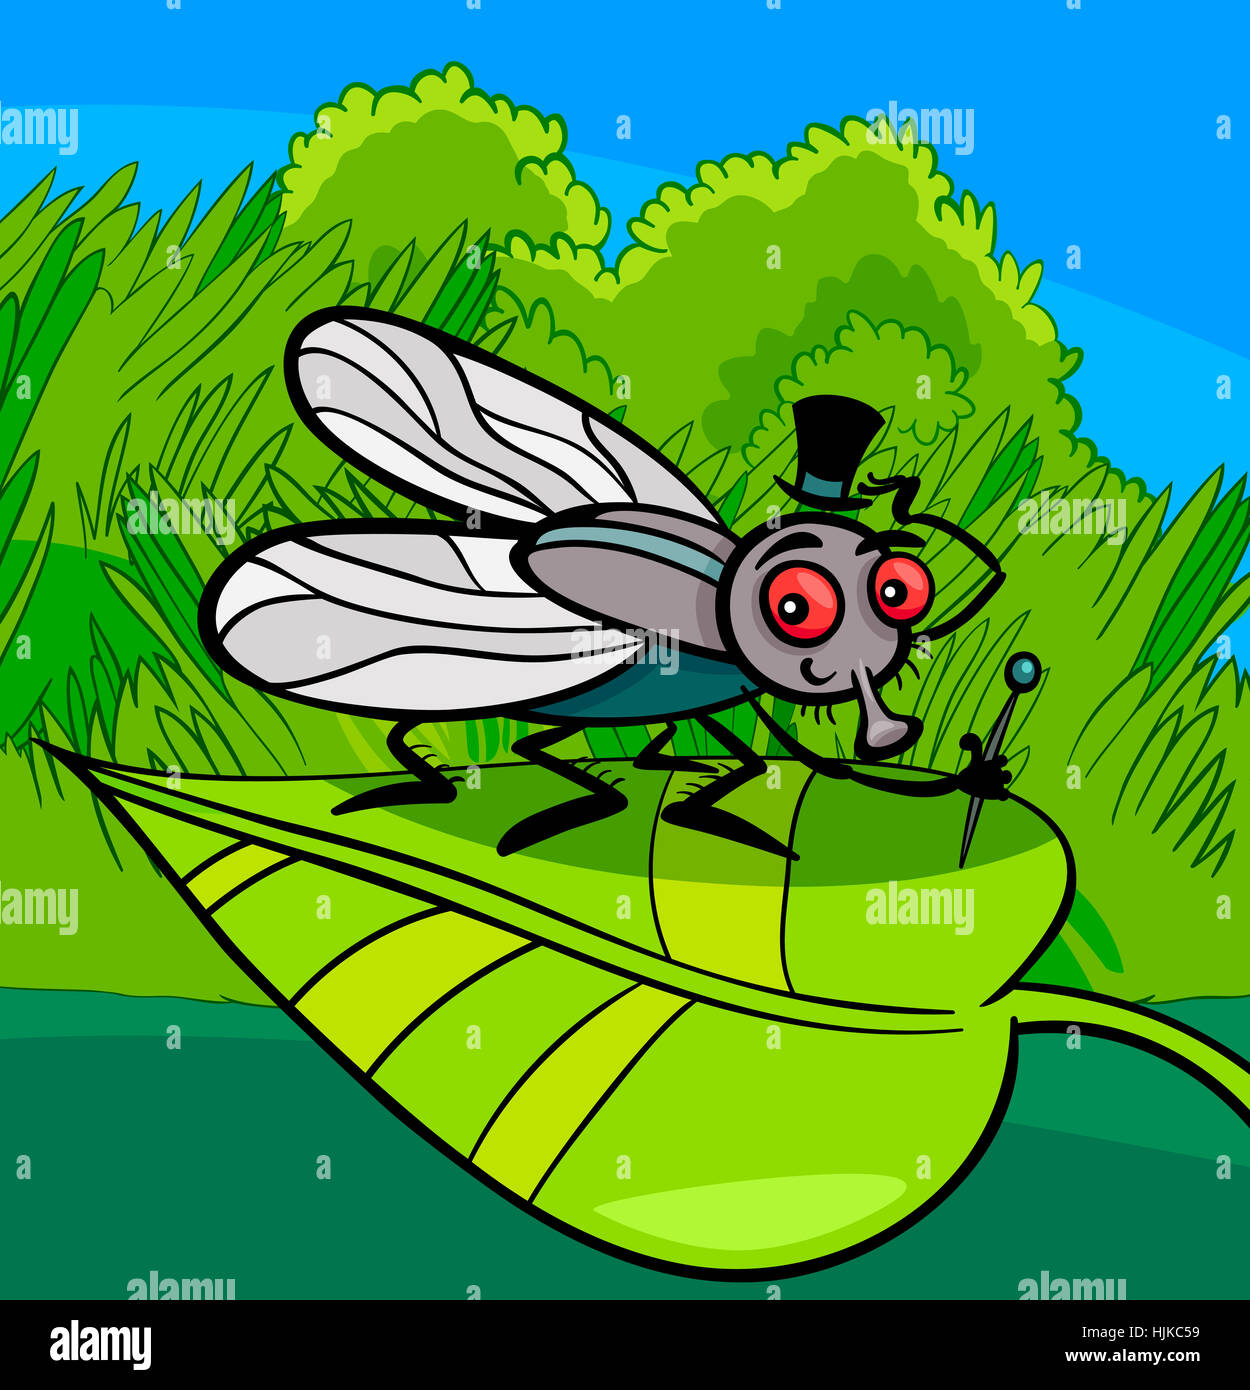 leaf, insect, illustration, character, housefly, cartoon, fly